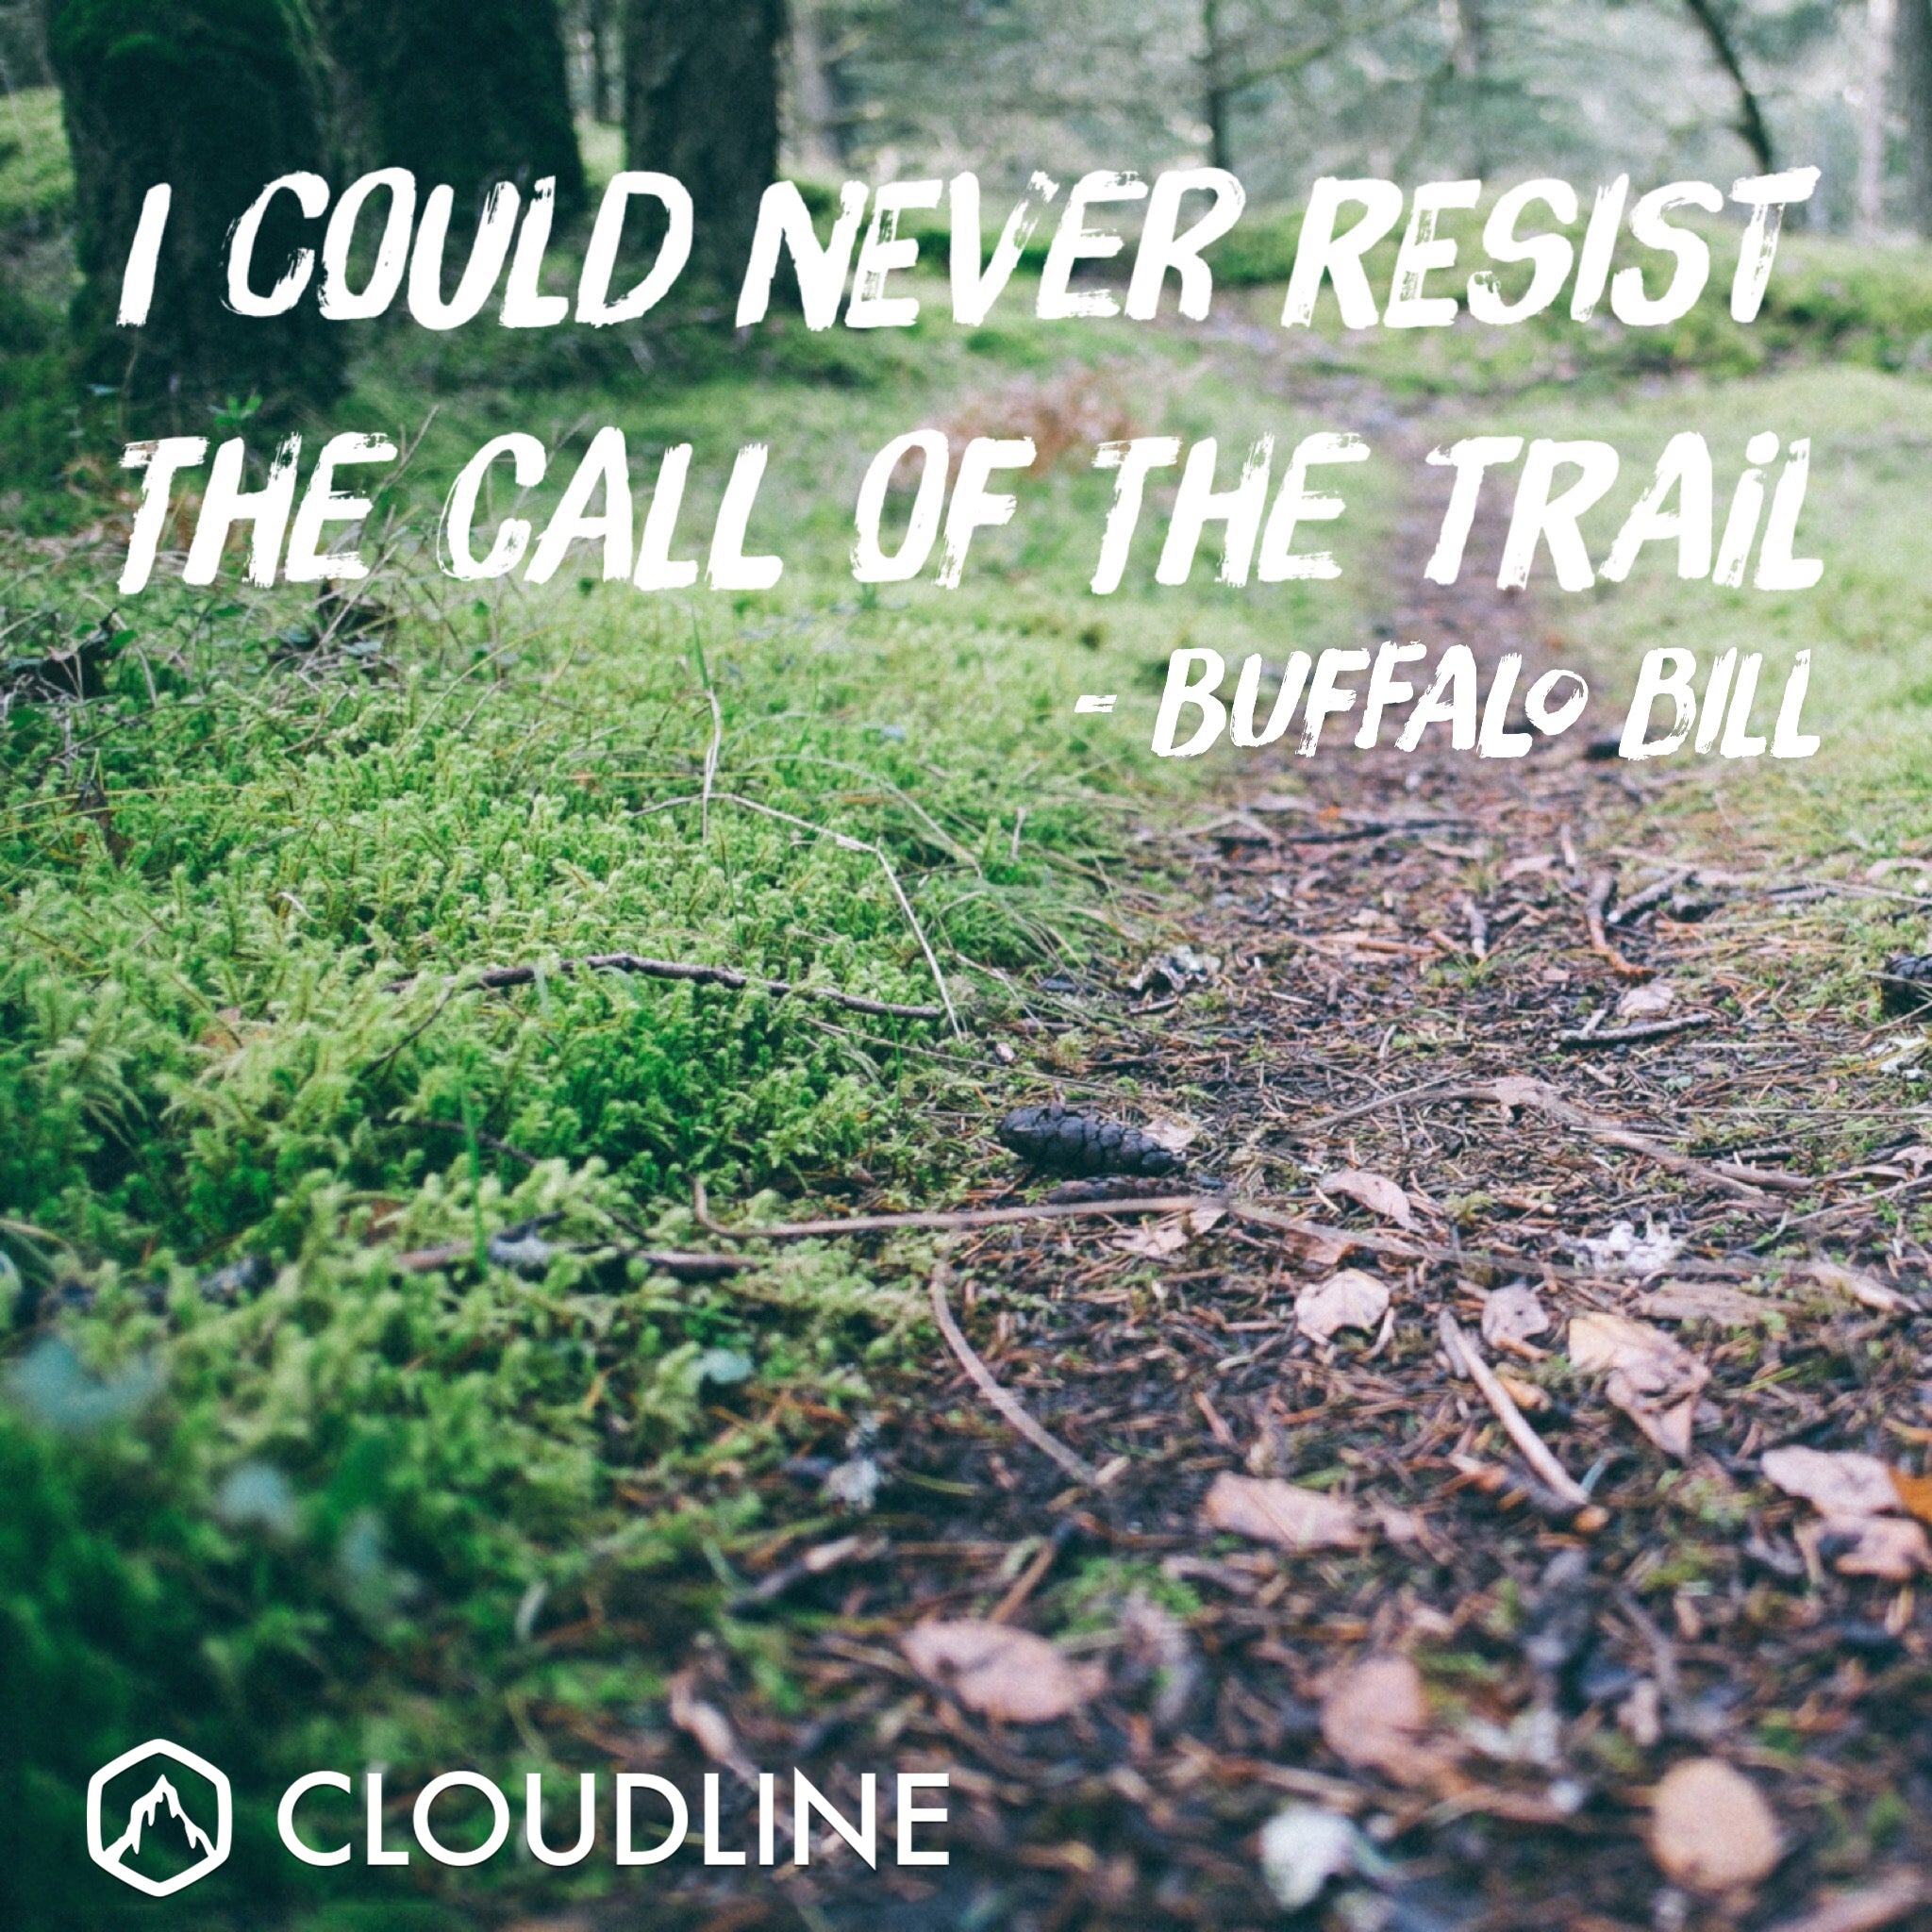 "I could never resist the call of the trail" - Buffalo Bill